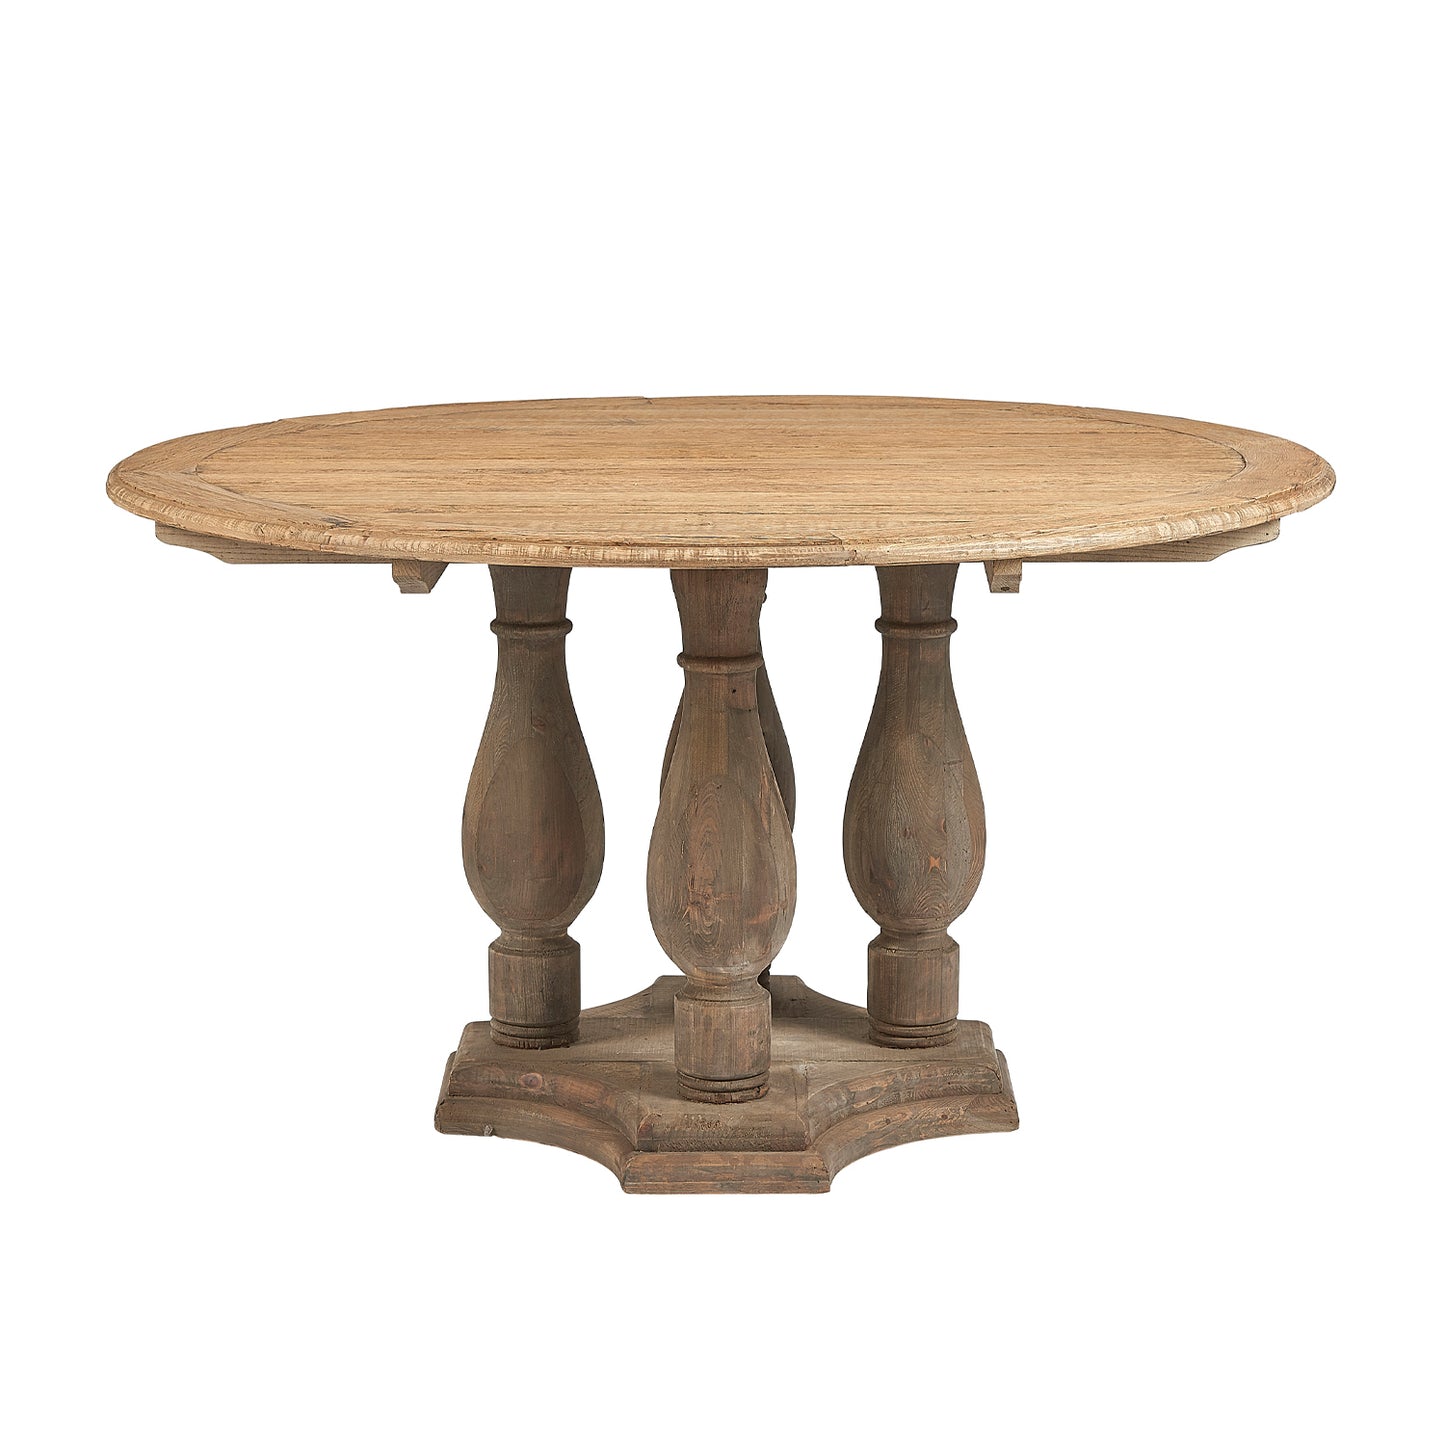 Lambs Green - Reclaimed Elm Round Dining Table with Pedestals